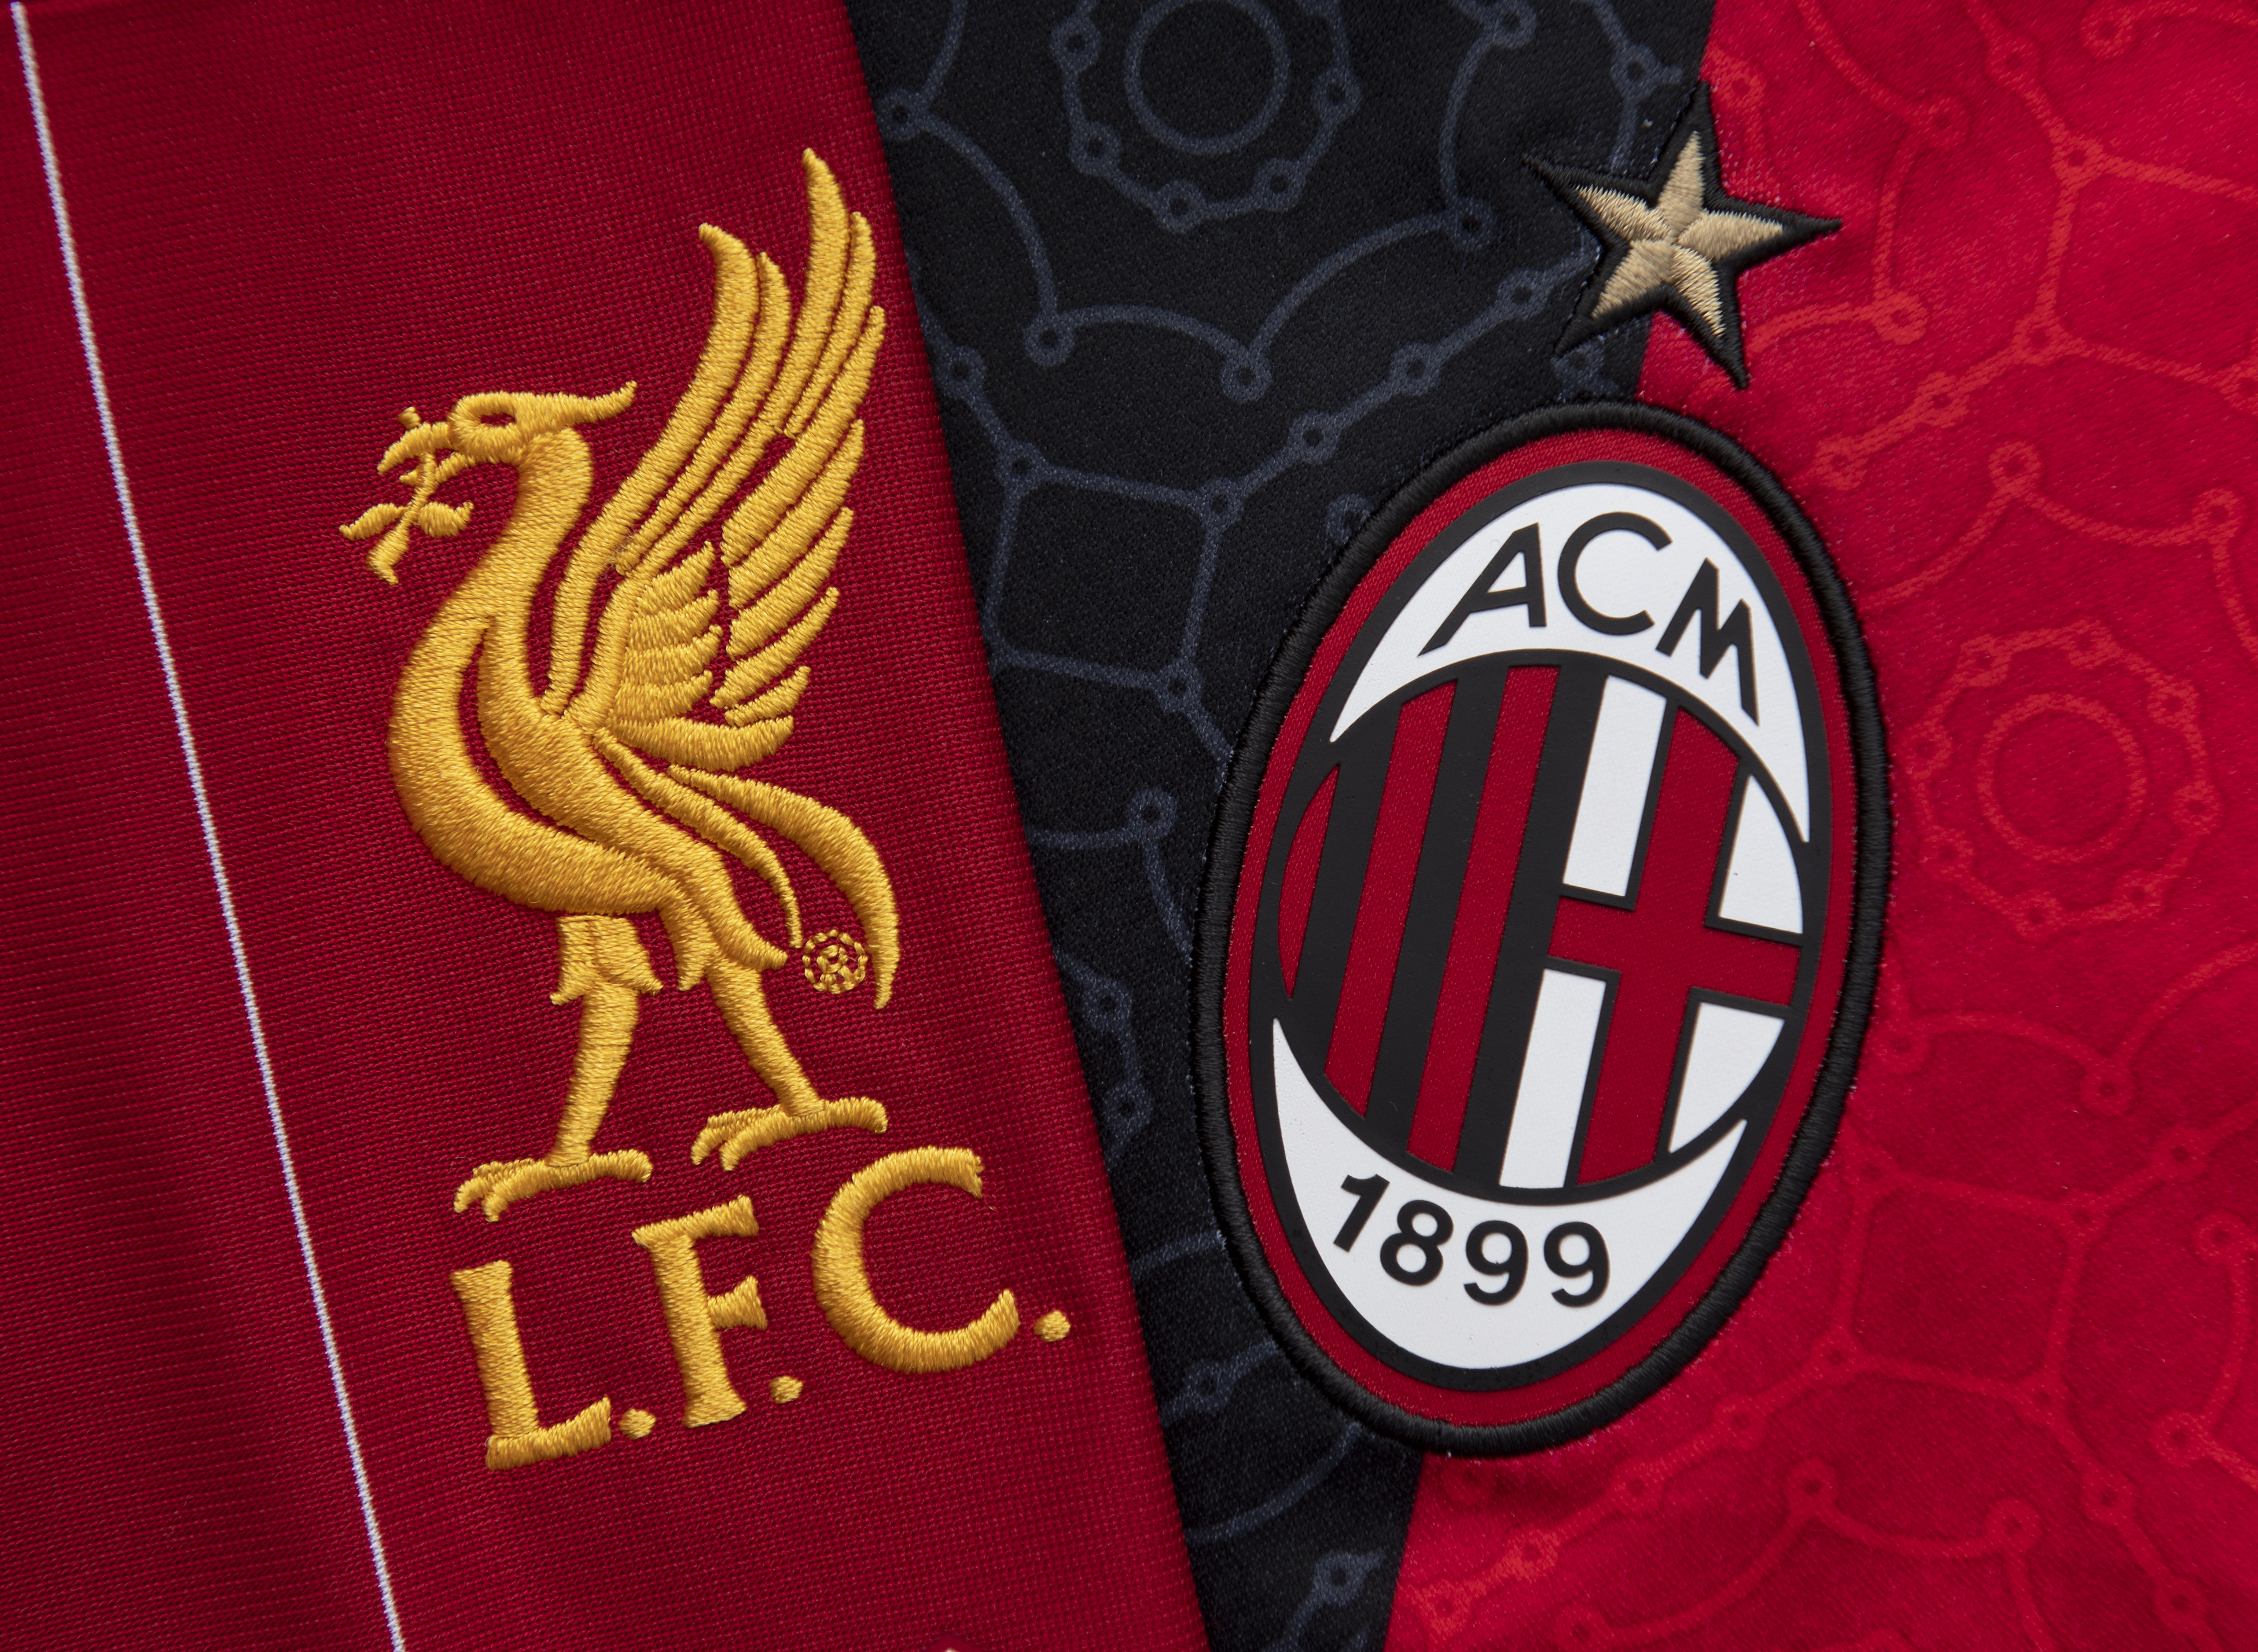 The Liverpool and AC Milan Club Badges